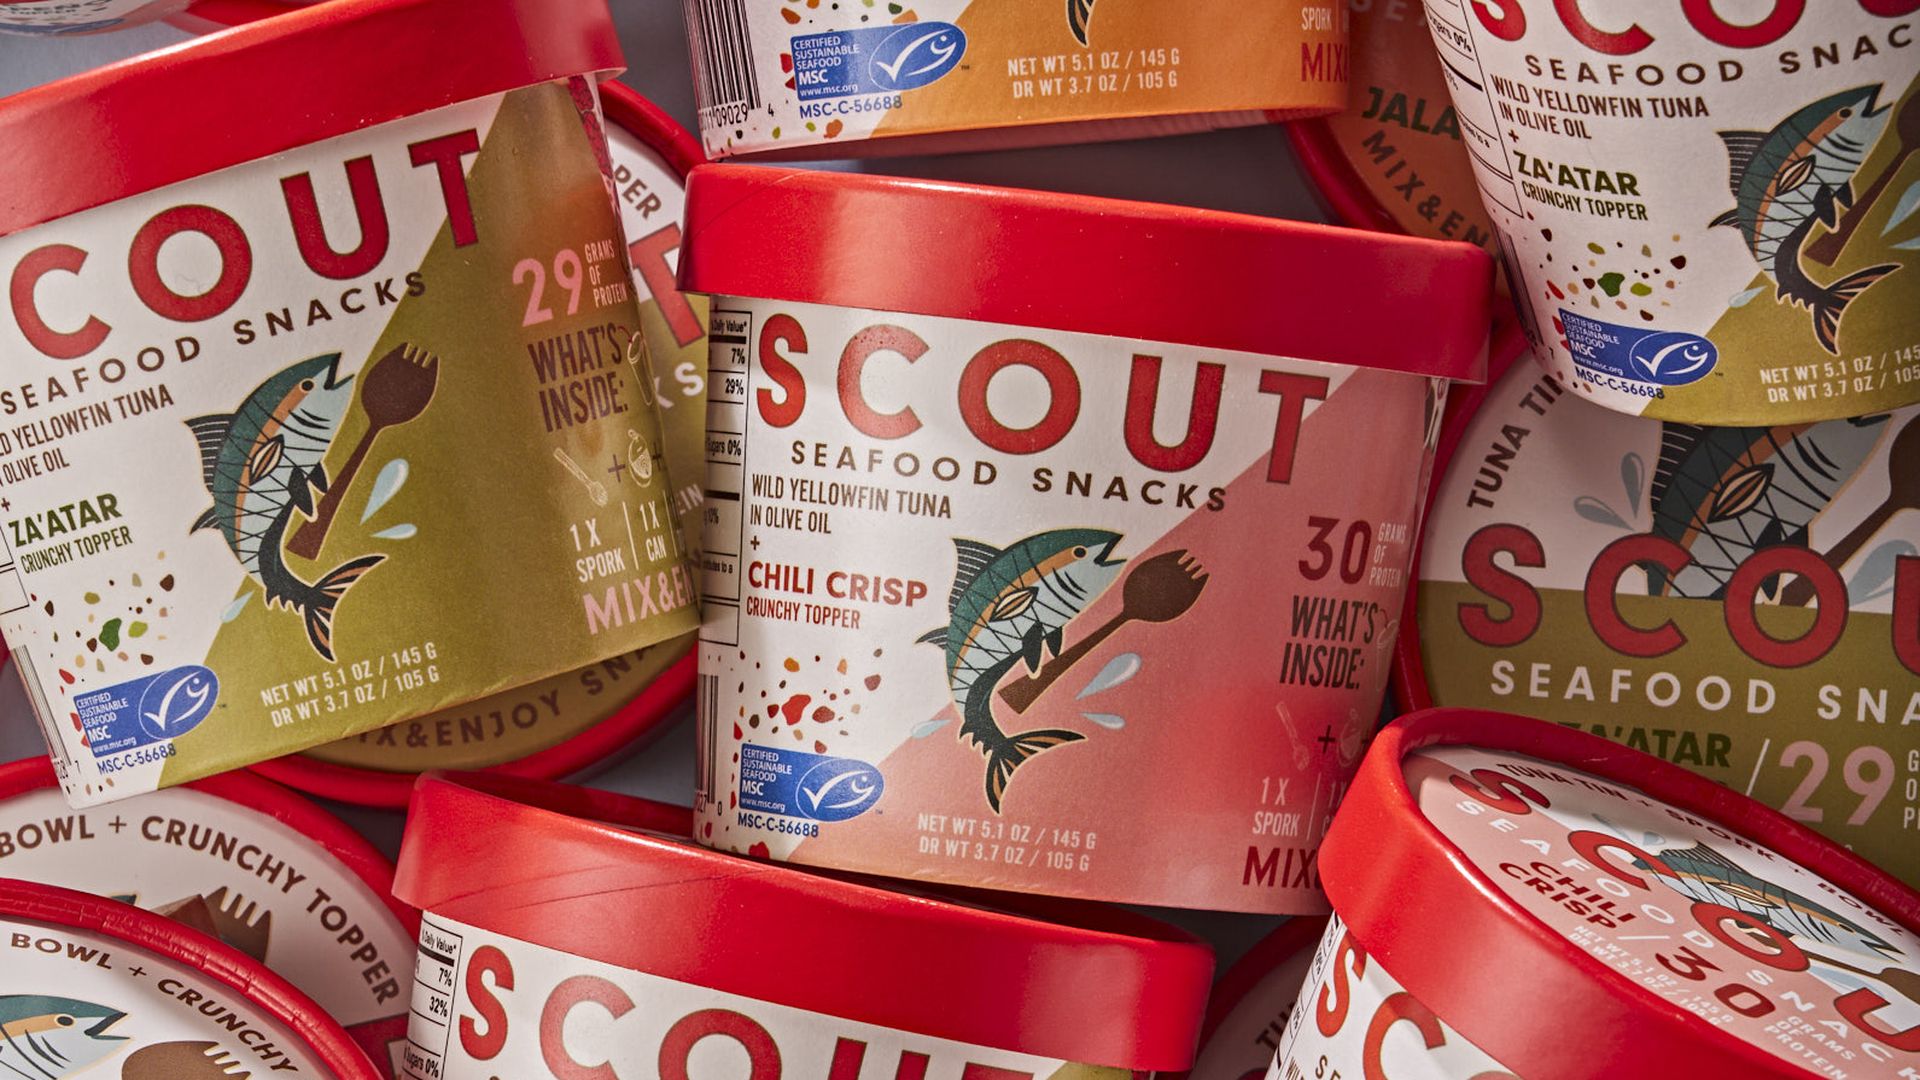 A jumble of Scout seafood snack containers.